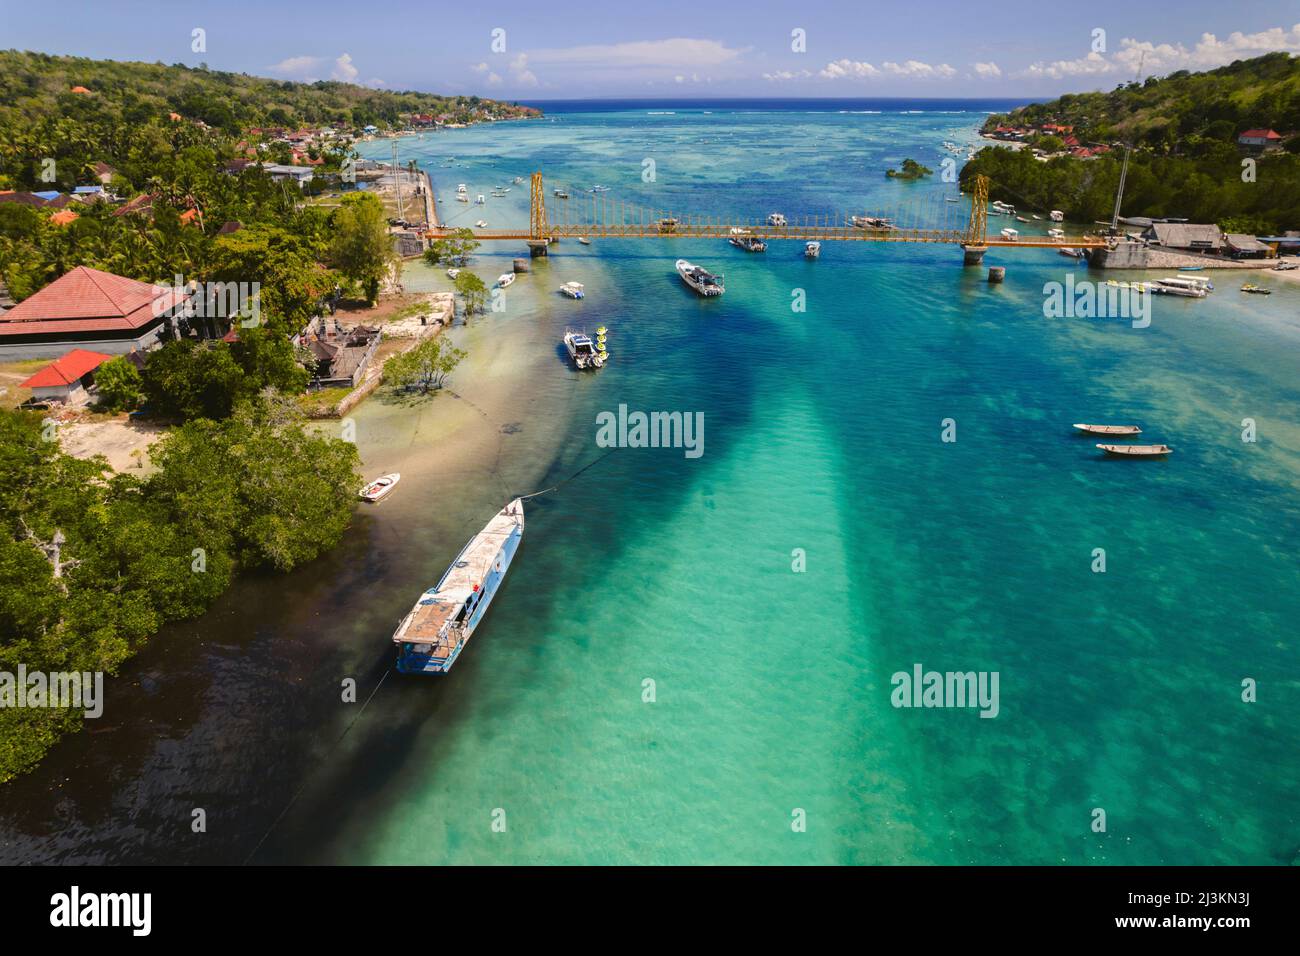 Inlet with boats along a tropical coastline, Komodo National Park; East Nusa Tenggara, Indonesia Stock Photo